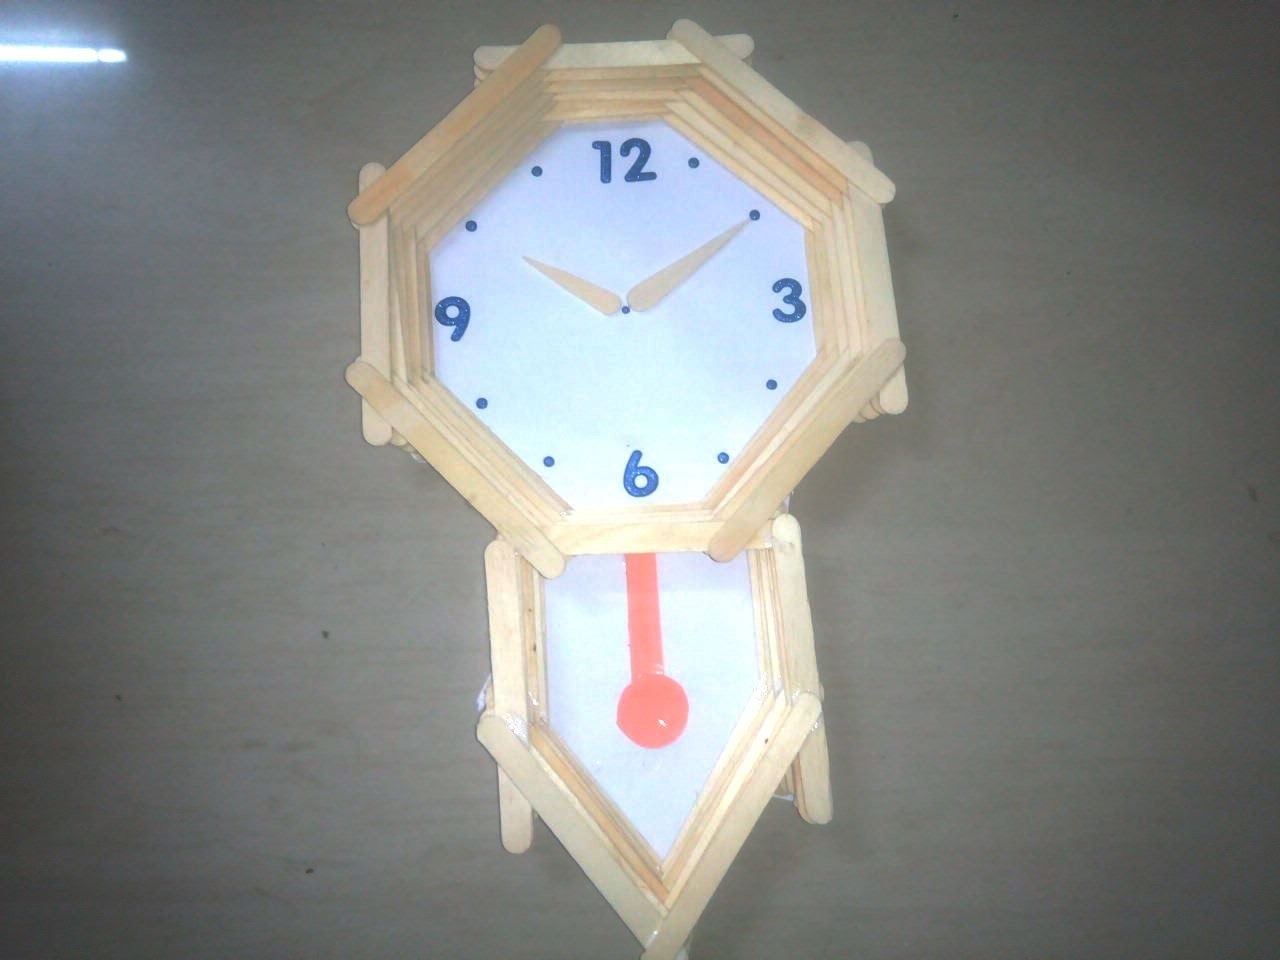 How to make pendulum wall clock with ice cream sticks - craft - school project for kids